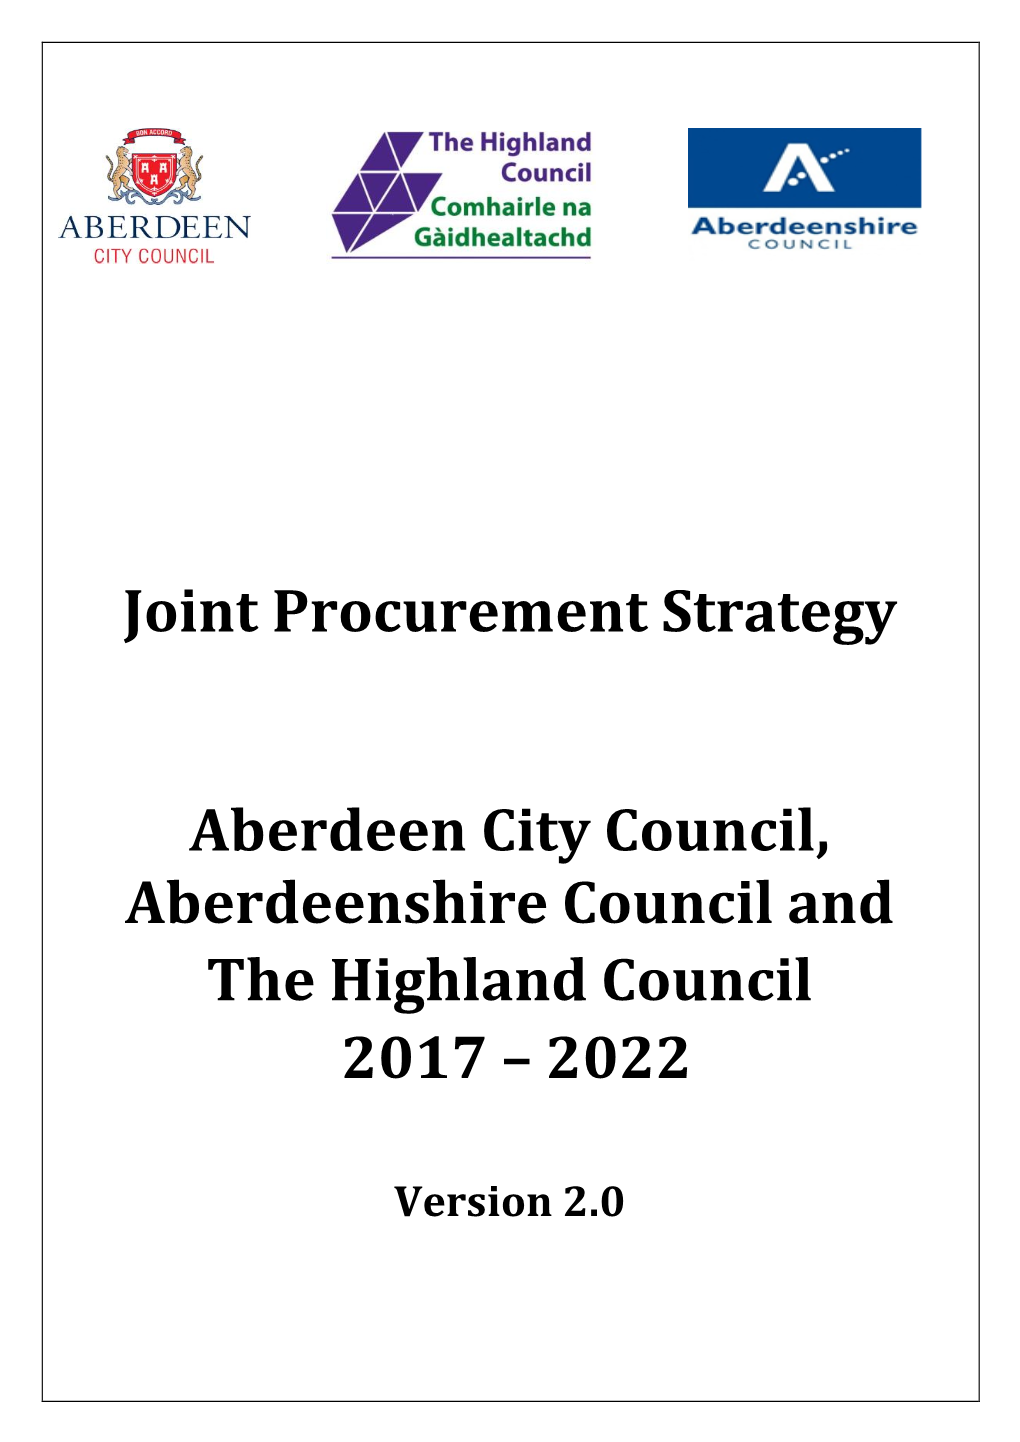 2017-2022 Joint Procurement Strategy Is